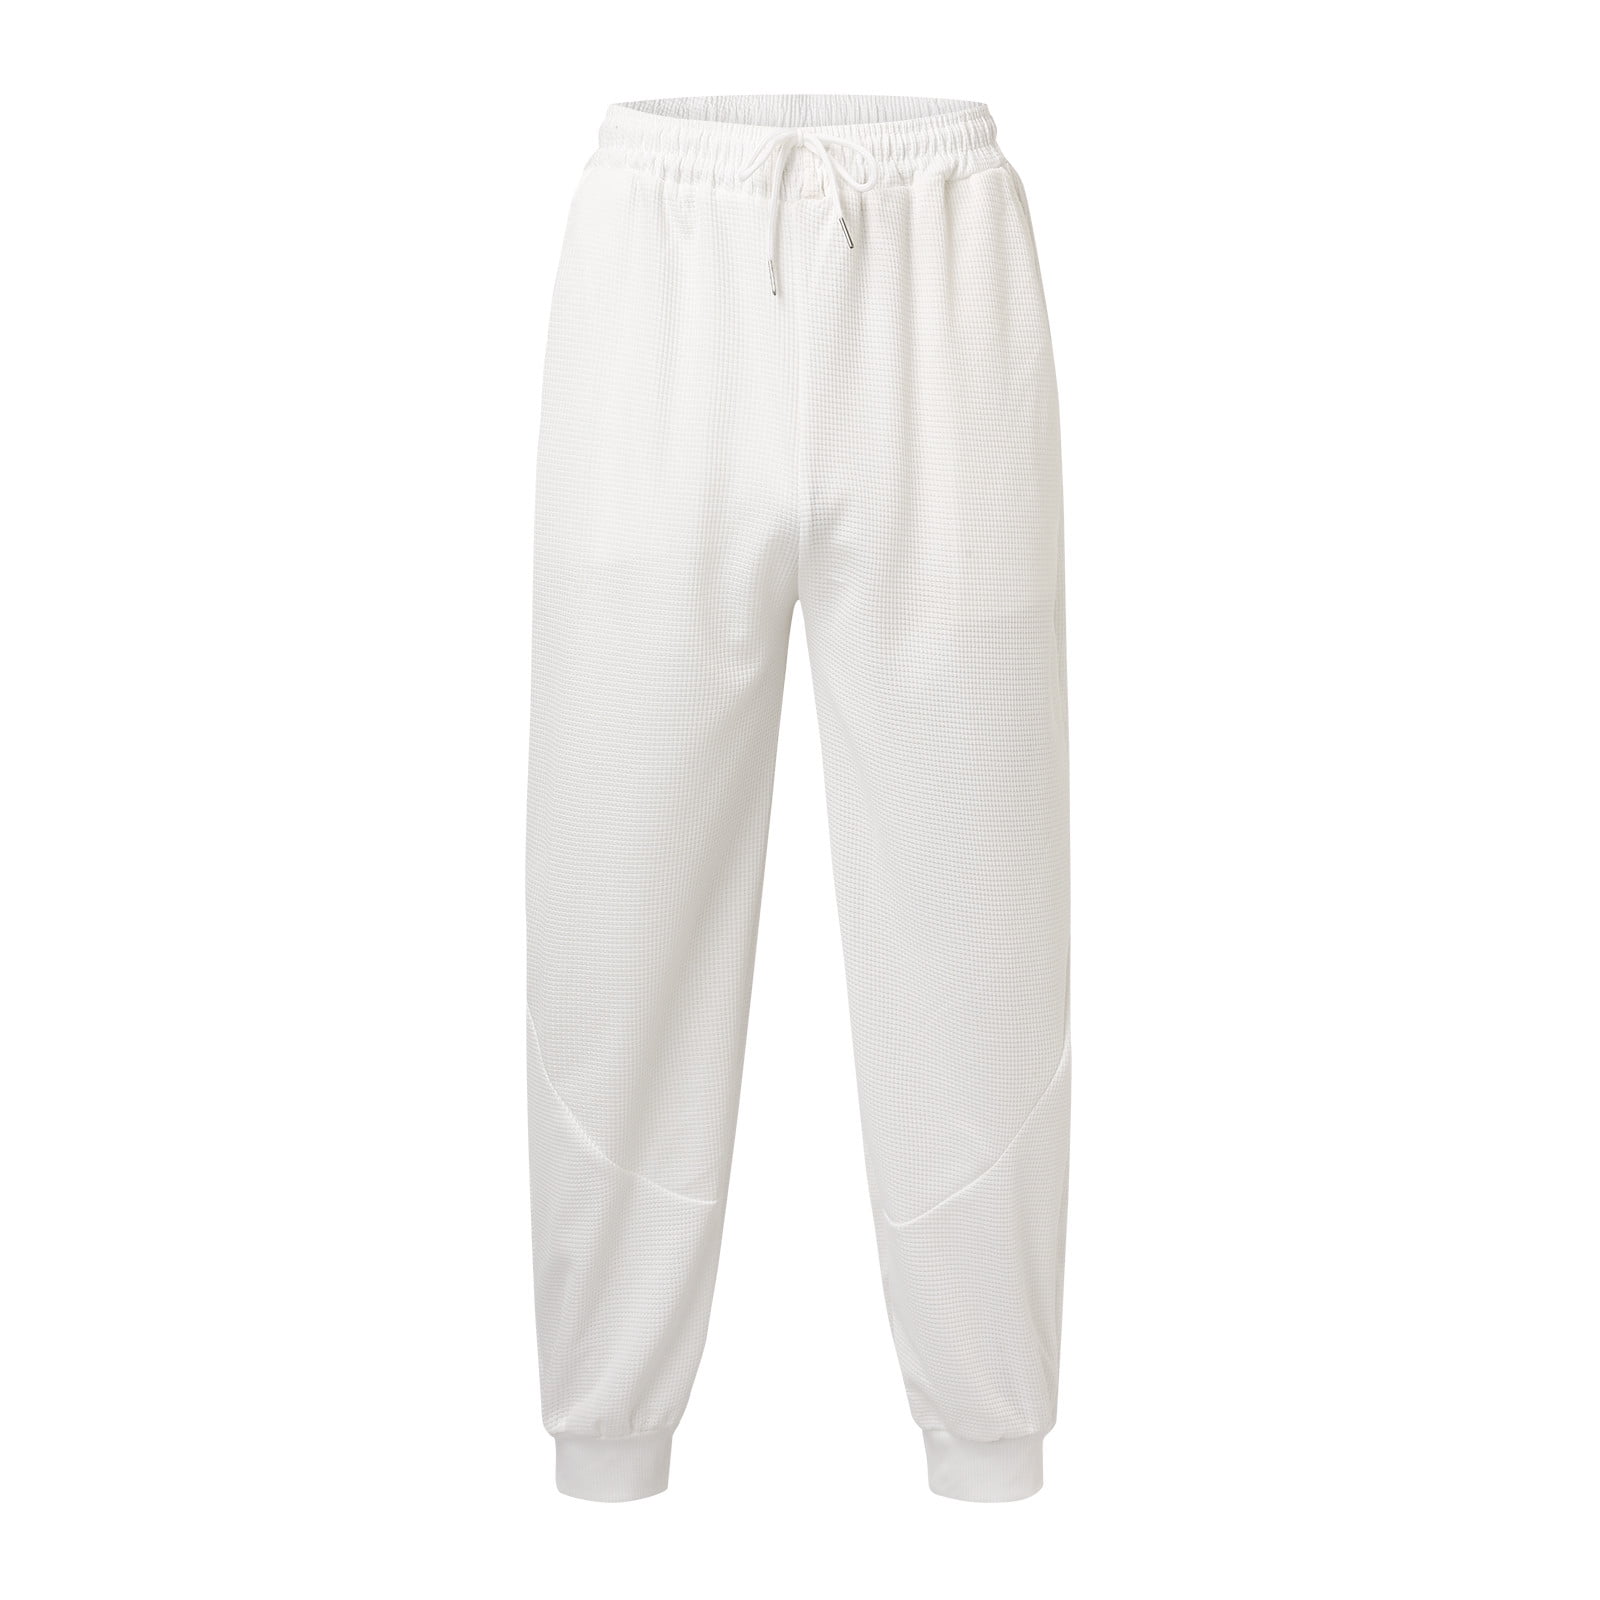 Summer White Sweatpants Mens Fashion Simple Solid Color Lace Up Slacks Foot  Pants And Trousers